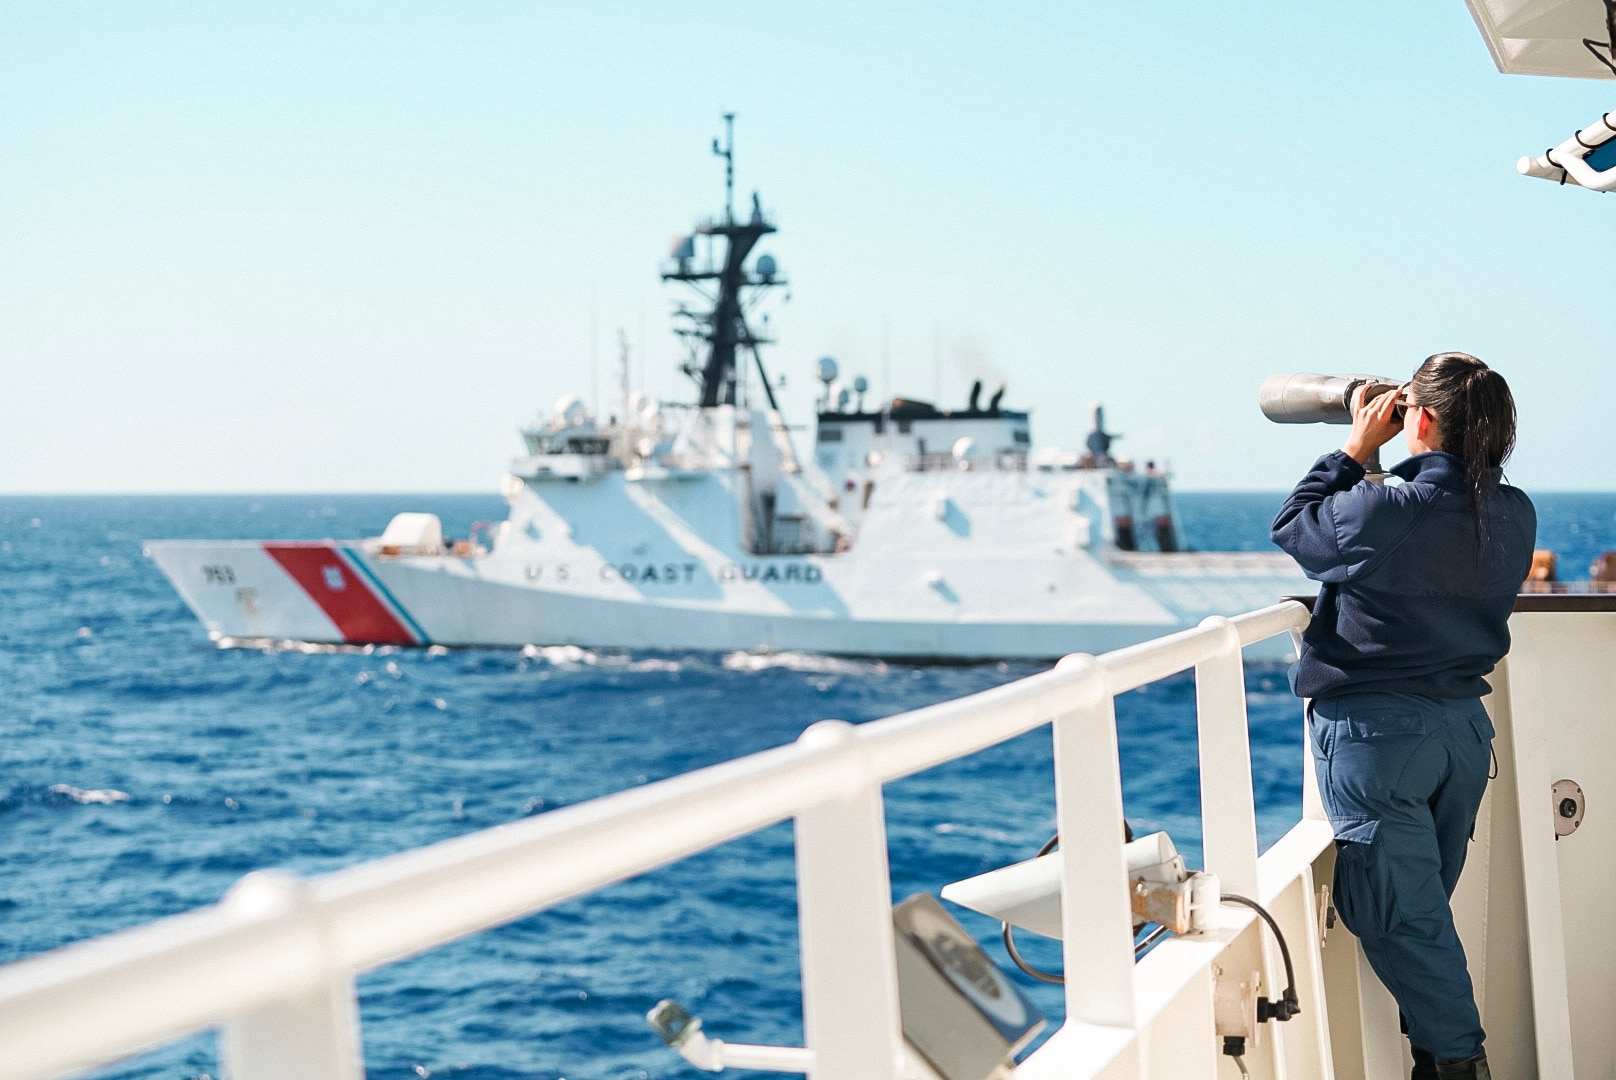 U.S. Coast Guard Seaman Vianey Salazar, a crewmember assigned to Coast Guard Cutter Thetis (WMEC 910), stands a lookout watch across from the Coast Guard Cutter Hamilton (WMSL 753), Jan. 11, 2024, in the Central Caribbean Sea. Thetis patrolled in support of the Coast Guard’s mission to combat illegal drug trafficking.